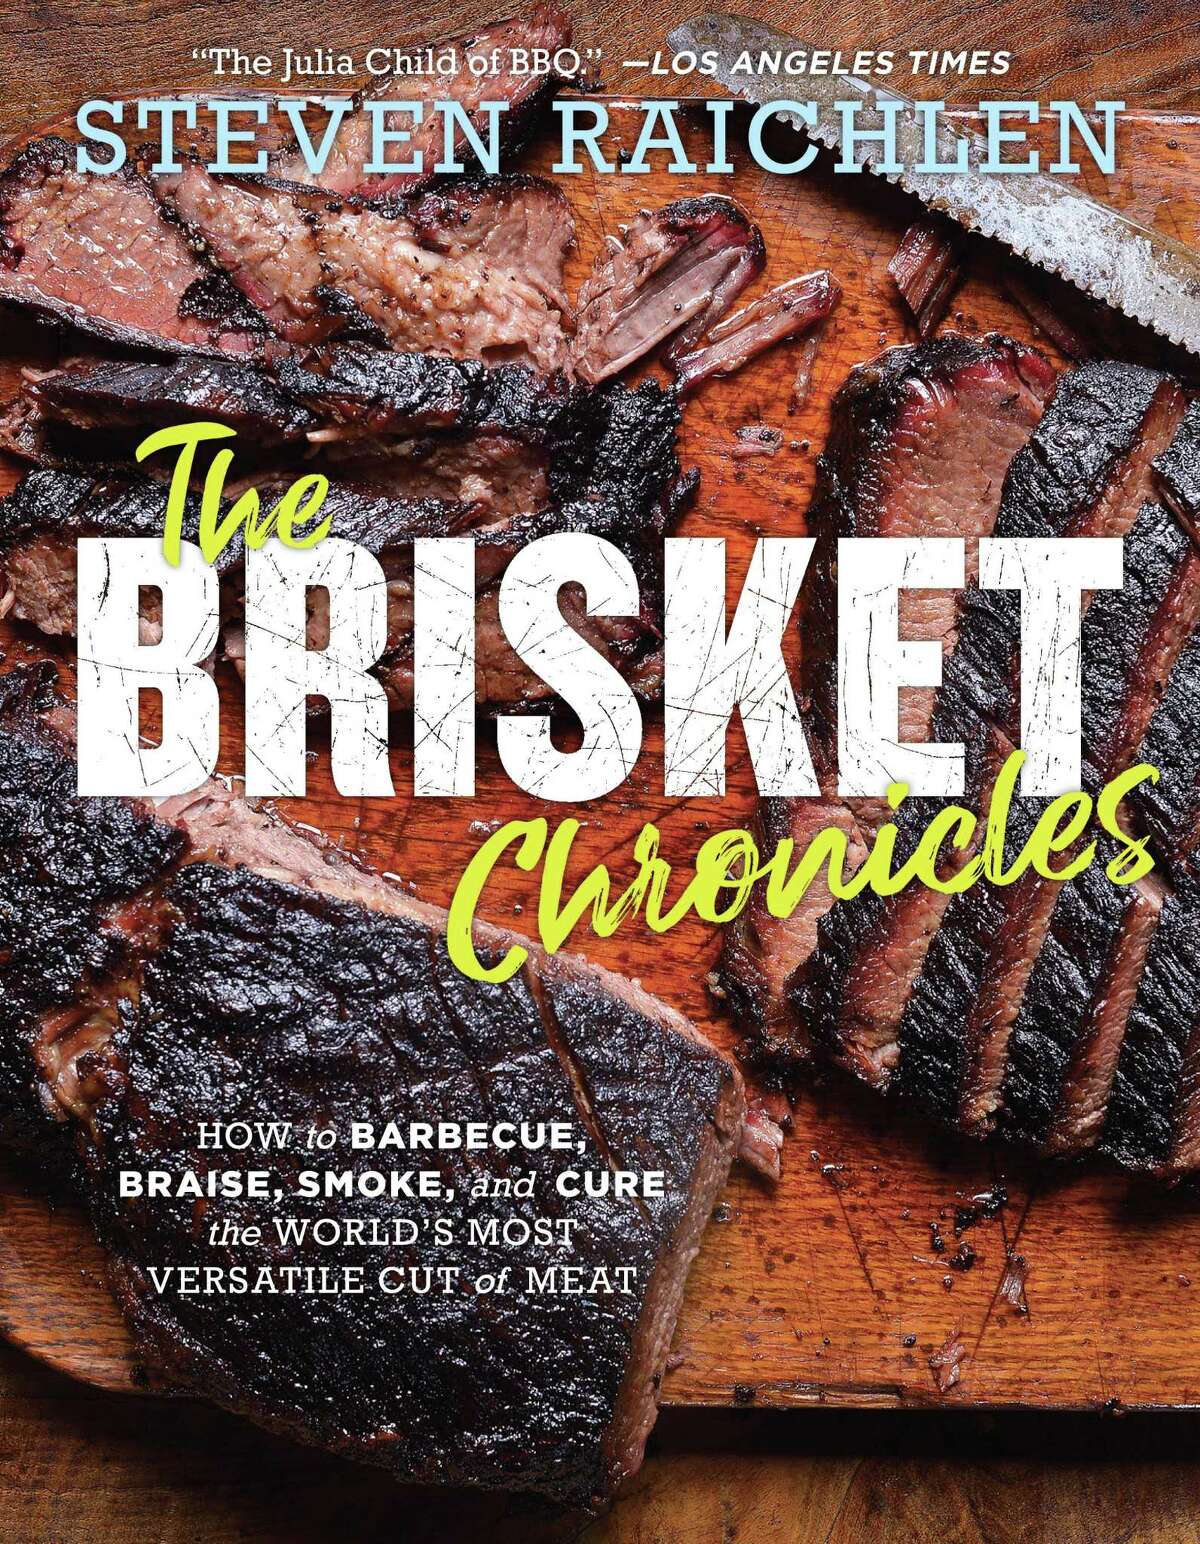 Cover: “The Brisket Chronicles: How to Barbecue, Braise, Smoke, and Cure the World’s Most Epic Cut of Meat” by Steven Raichlen (Workman, $19.95).